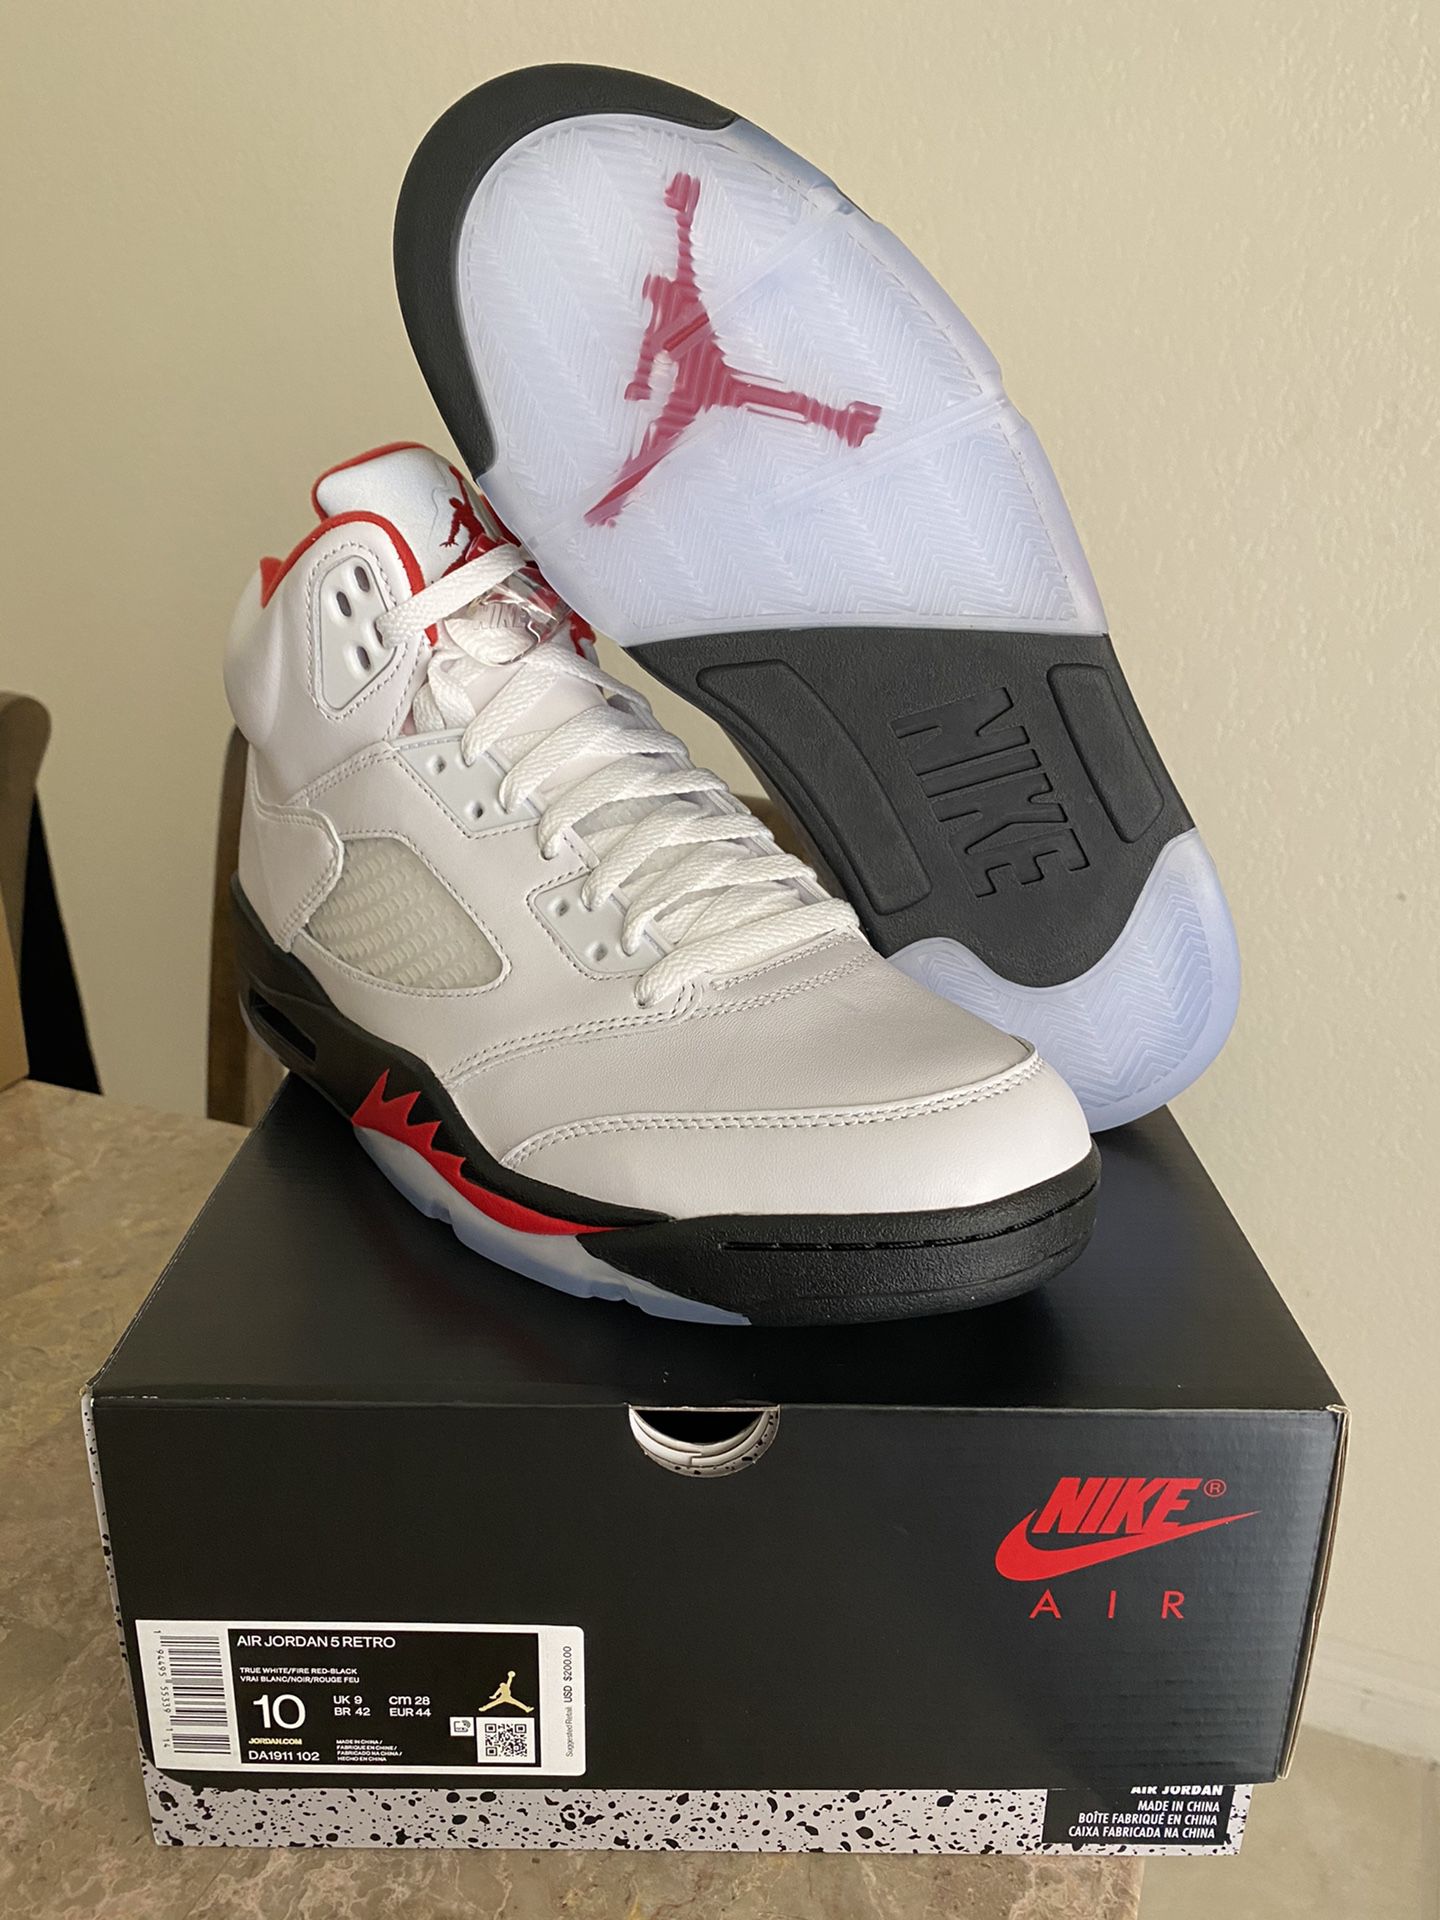 Air jordan 5 “Fire red” 2020 size 10 new DS 100% authentic